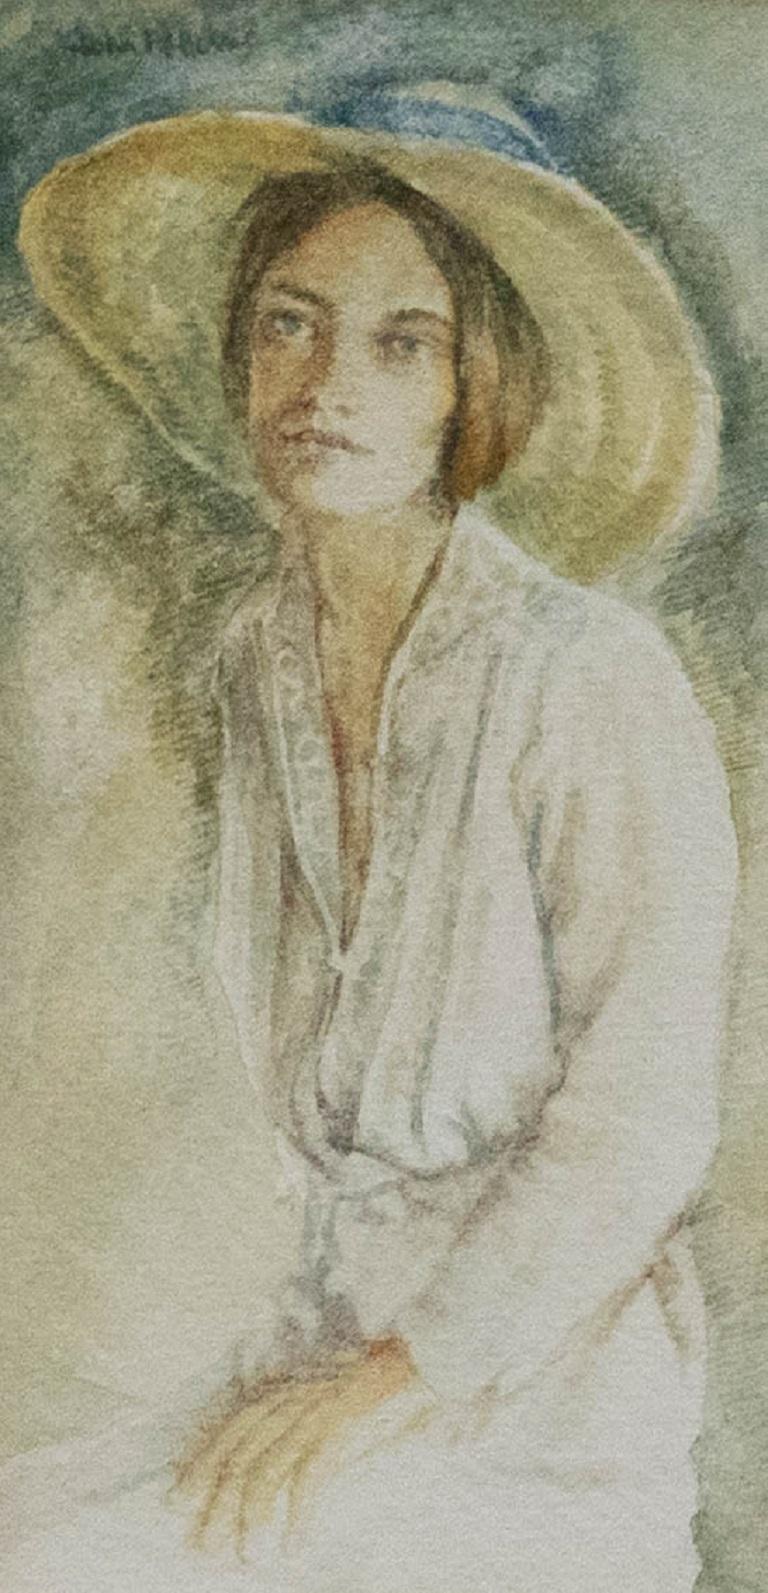 A delightful watercolour study of a young lady wearing a white blouse with a large brimmed summer hat, gazing softly at the viewer. Well presented in a elegant gilt-effect frame. Indistinctly signed. On watercolour paper. 